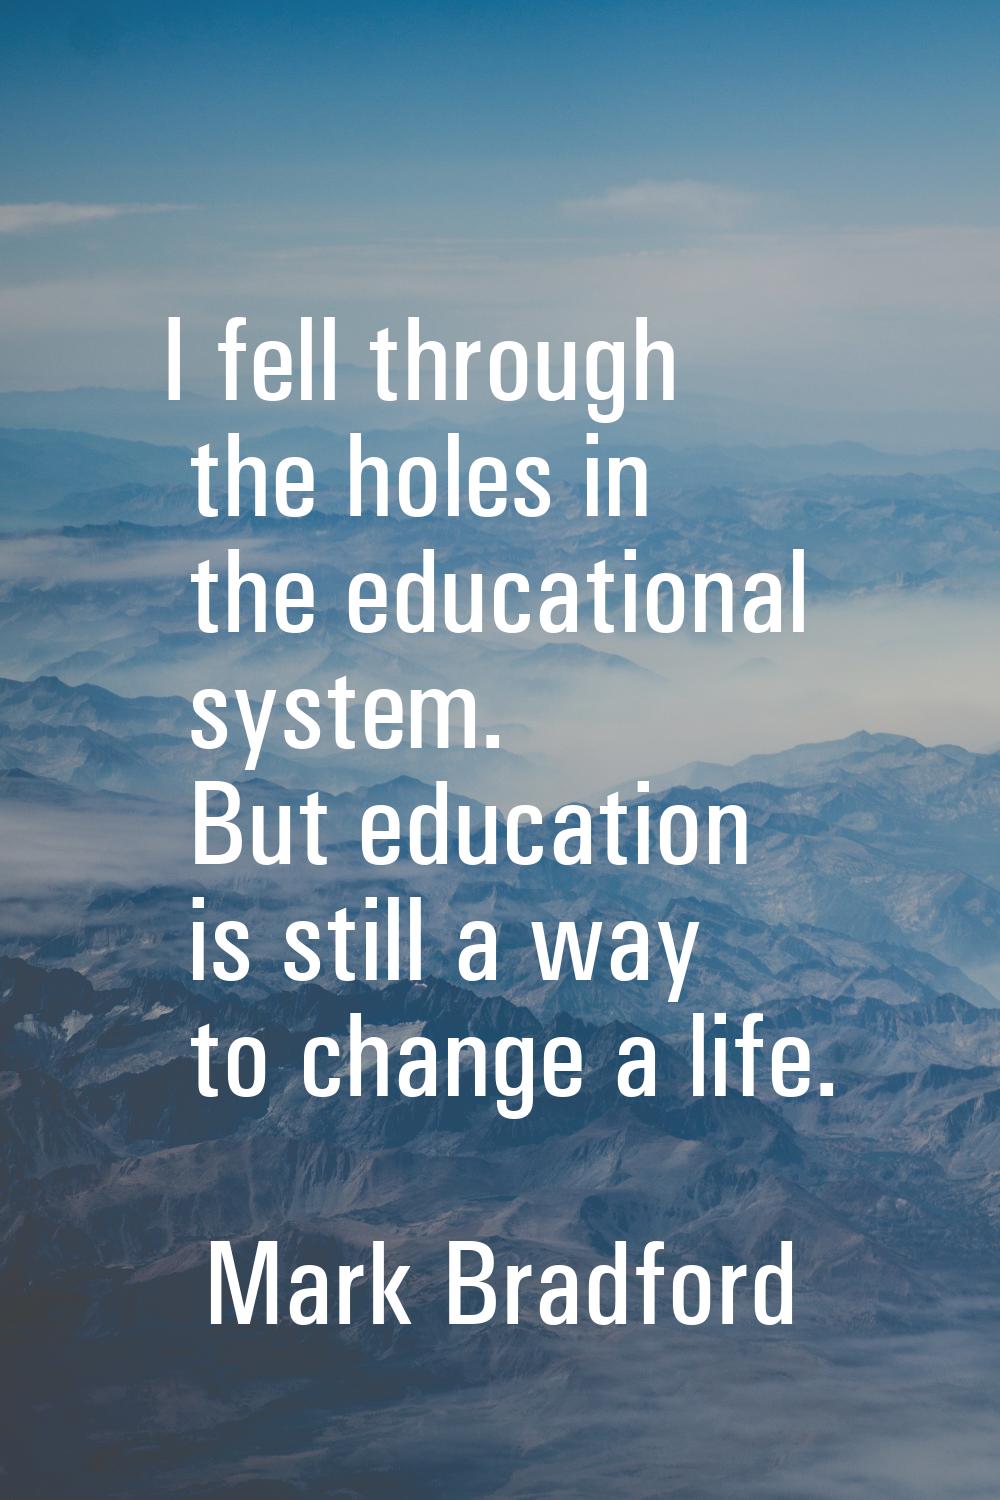 I fell through the holes in the educational system. But education is still a way to change a life.